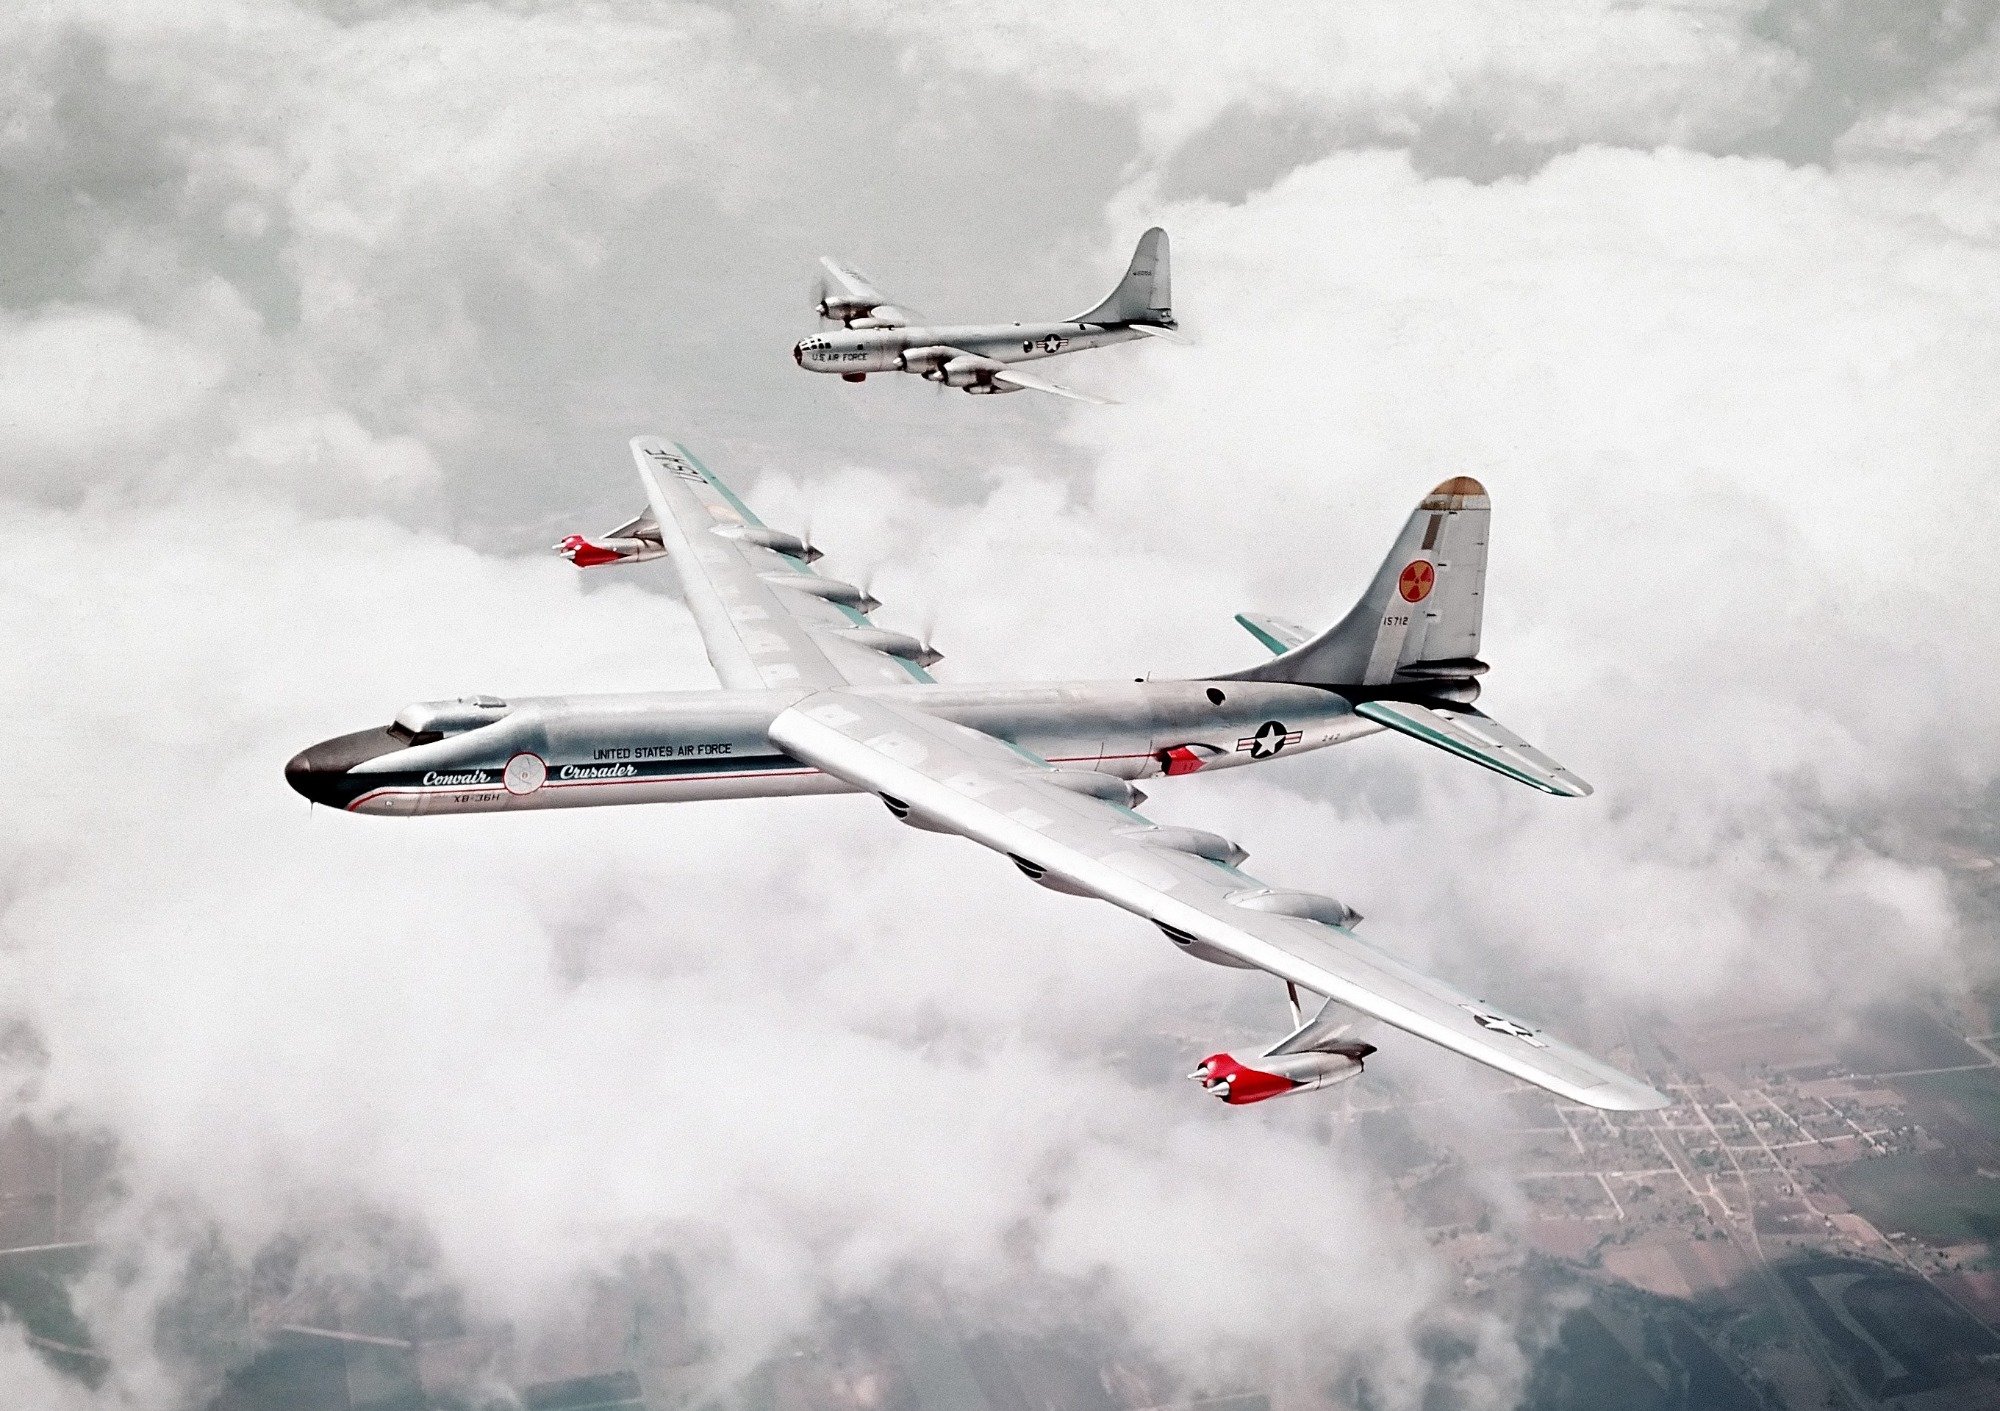 Convair B-36 Peacemaker: Largest Mass-Produced Piston-Engined Bomber Ever